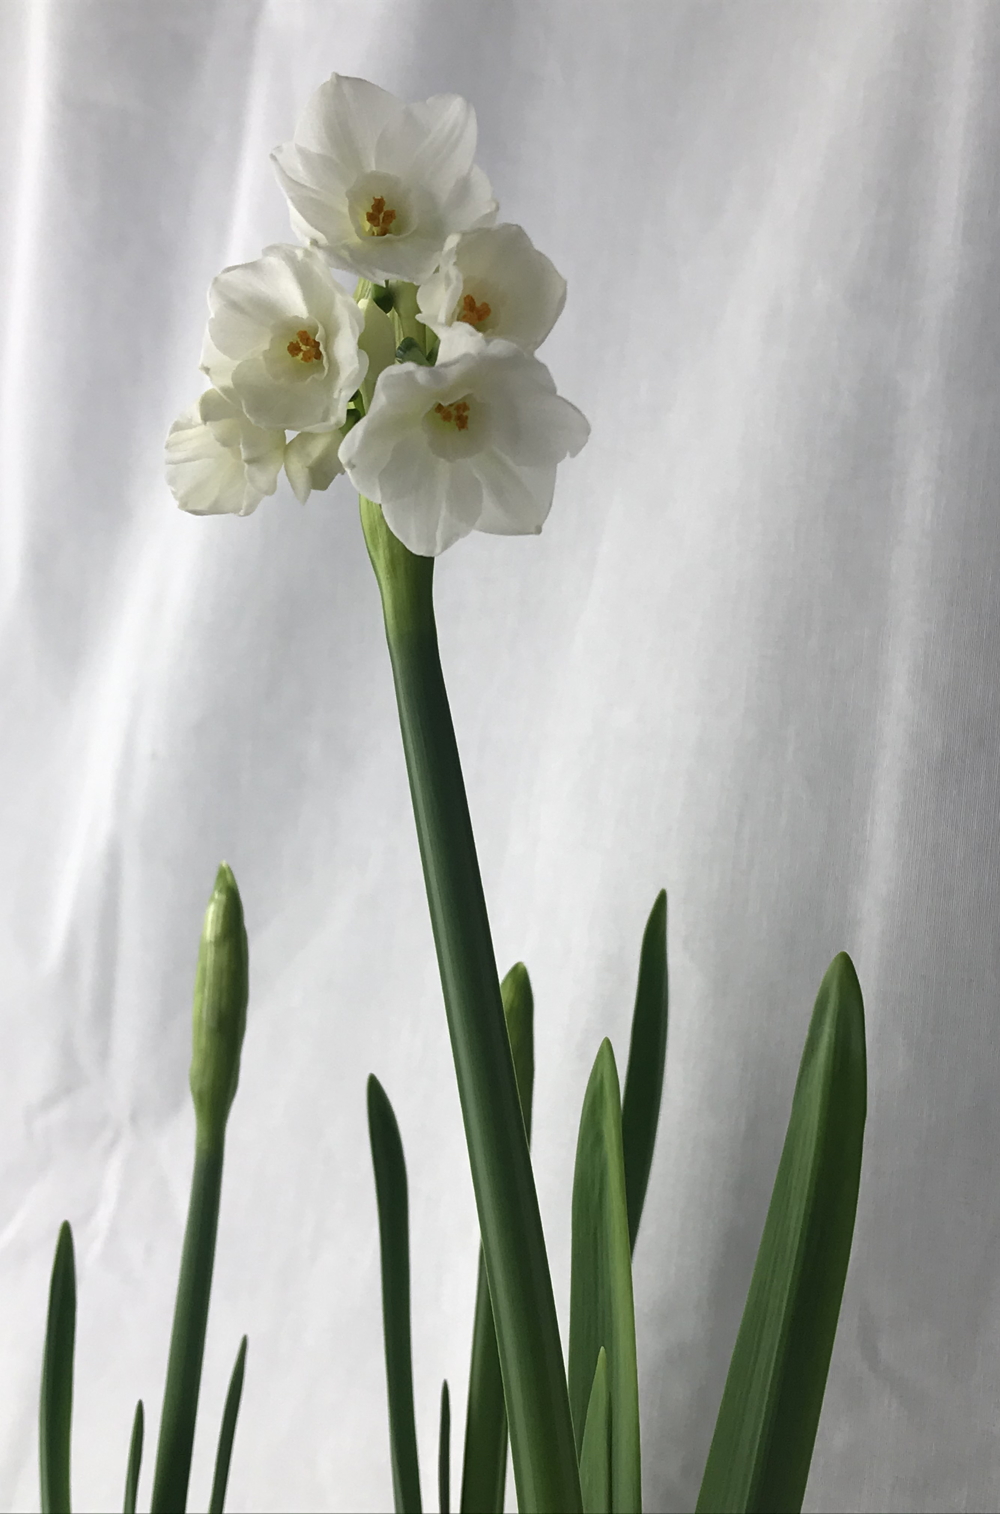 A photo of white paperwhite narcissus flowers and green buds and leaves indoors, with a white curtain in the background.